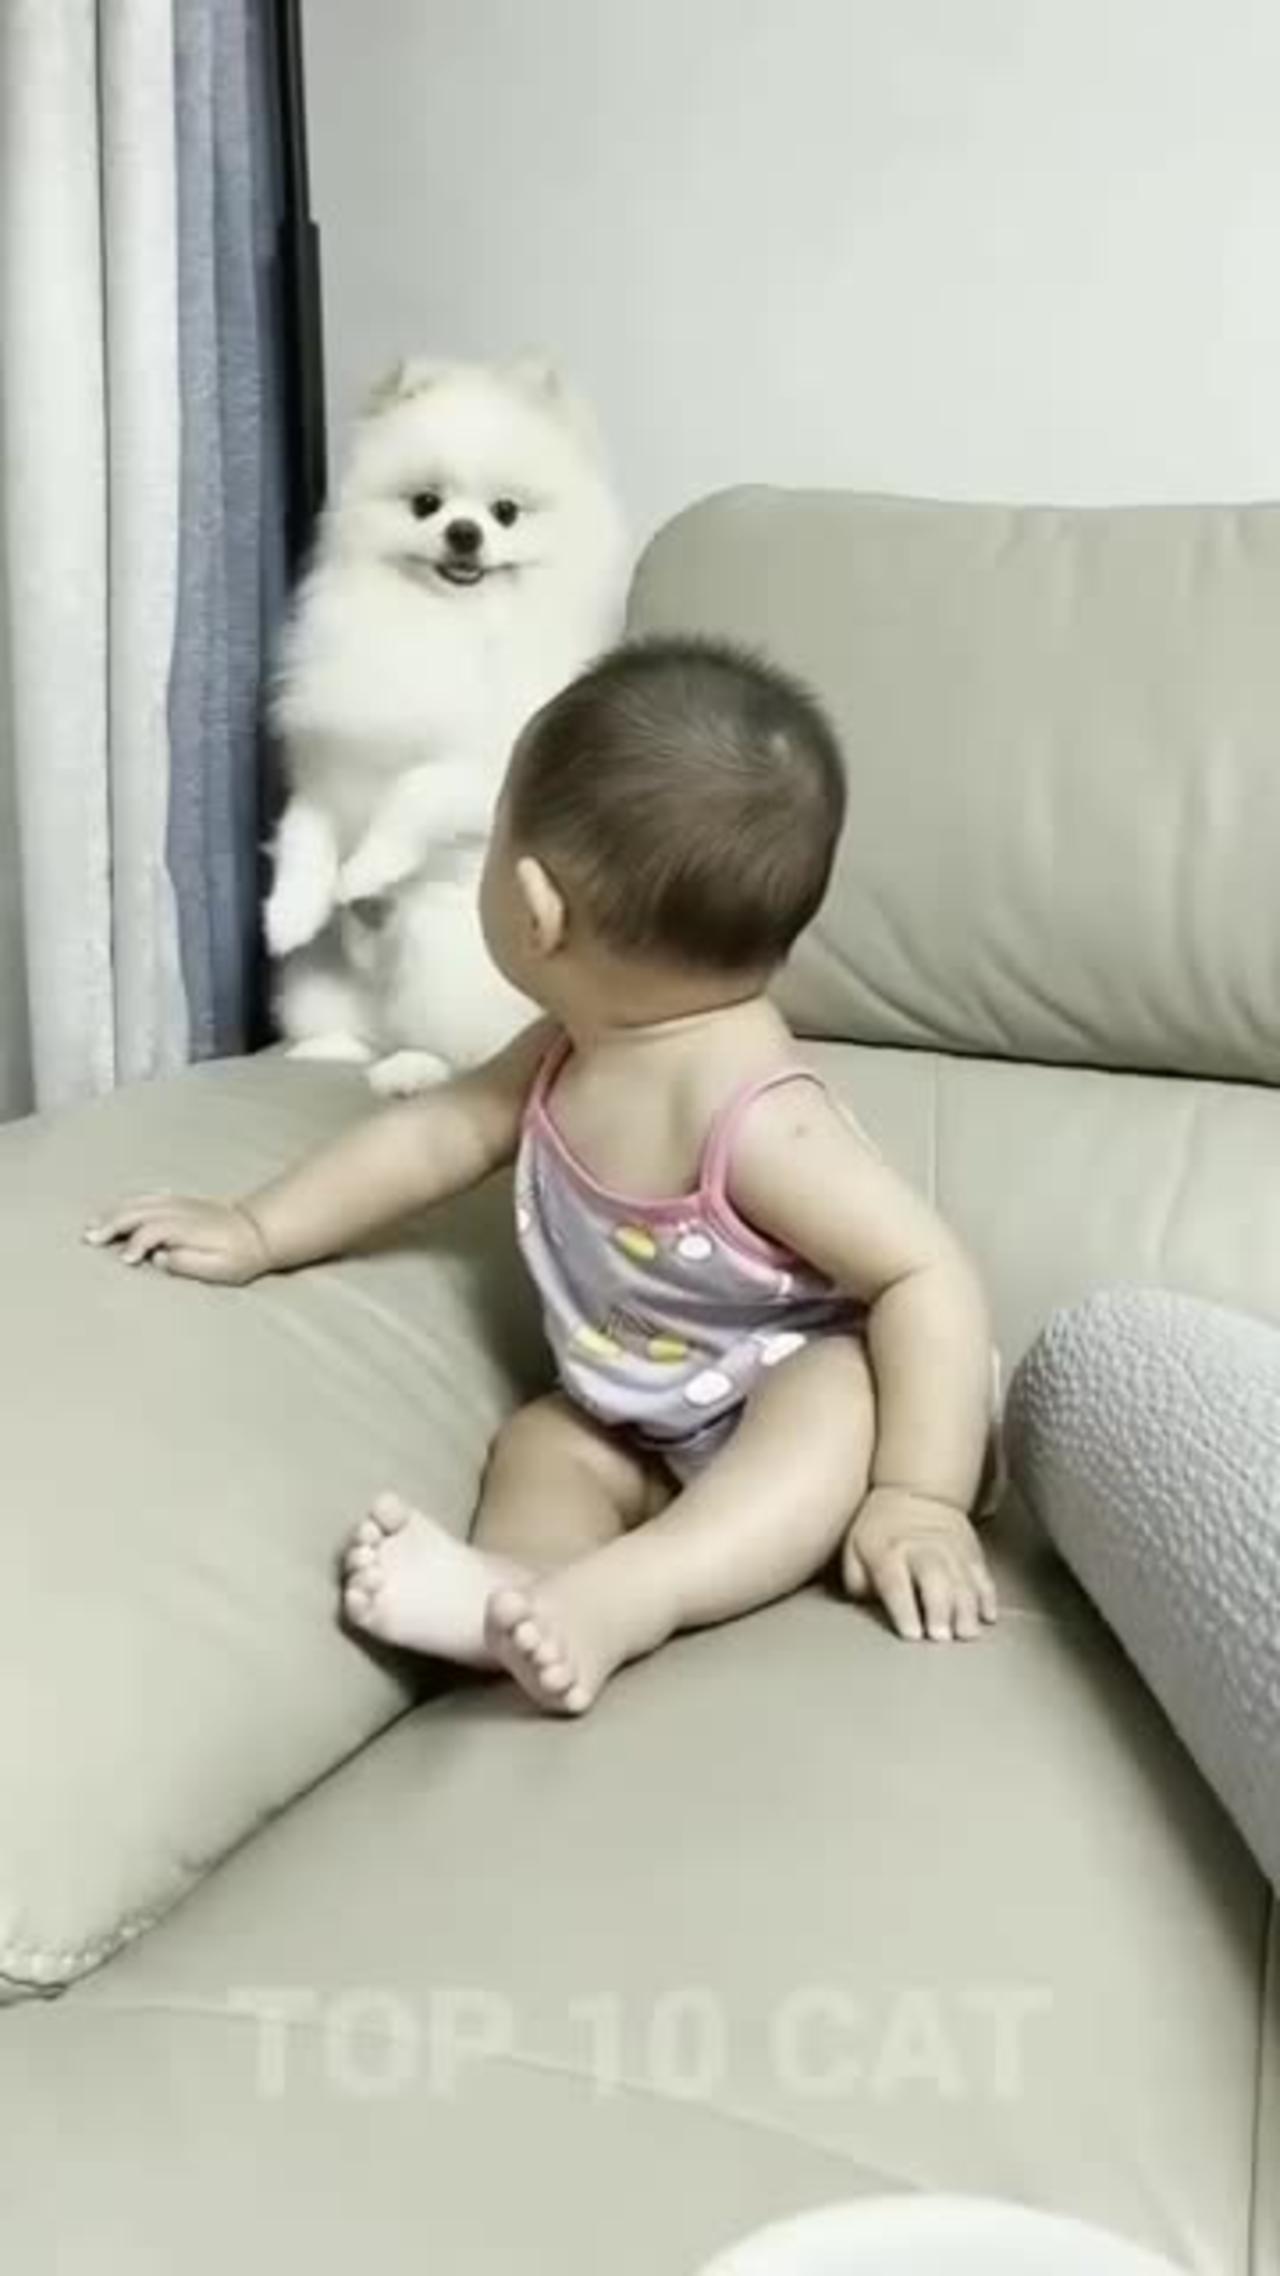 CUTE DOG AND BABY